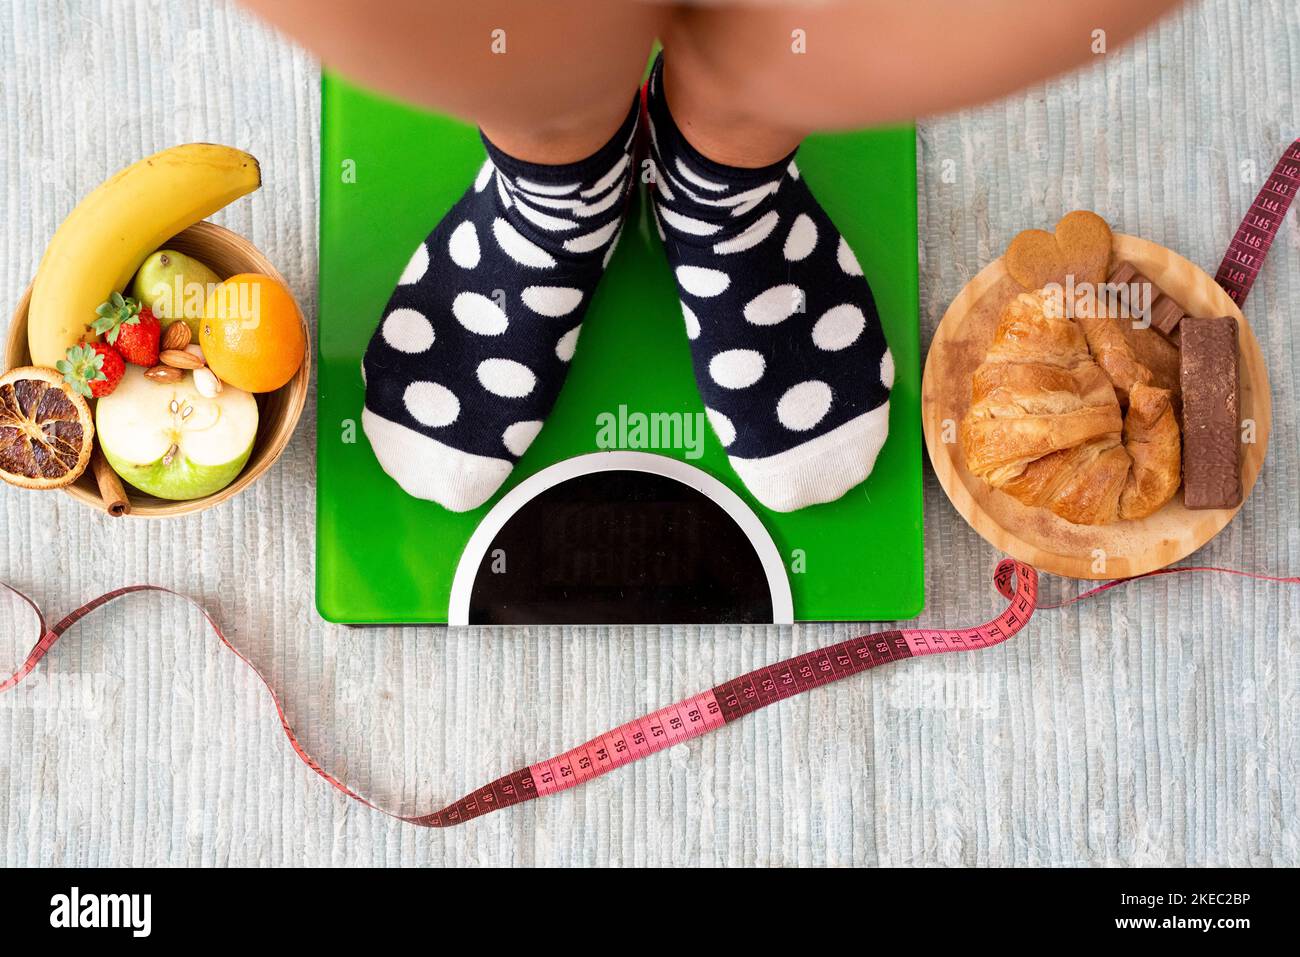 close up and portrait of legs and feet weighing on a weight scale to see if she has lose weight after a healthy lifestyle eating fruit Stock Photo